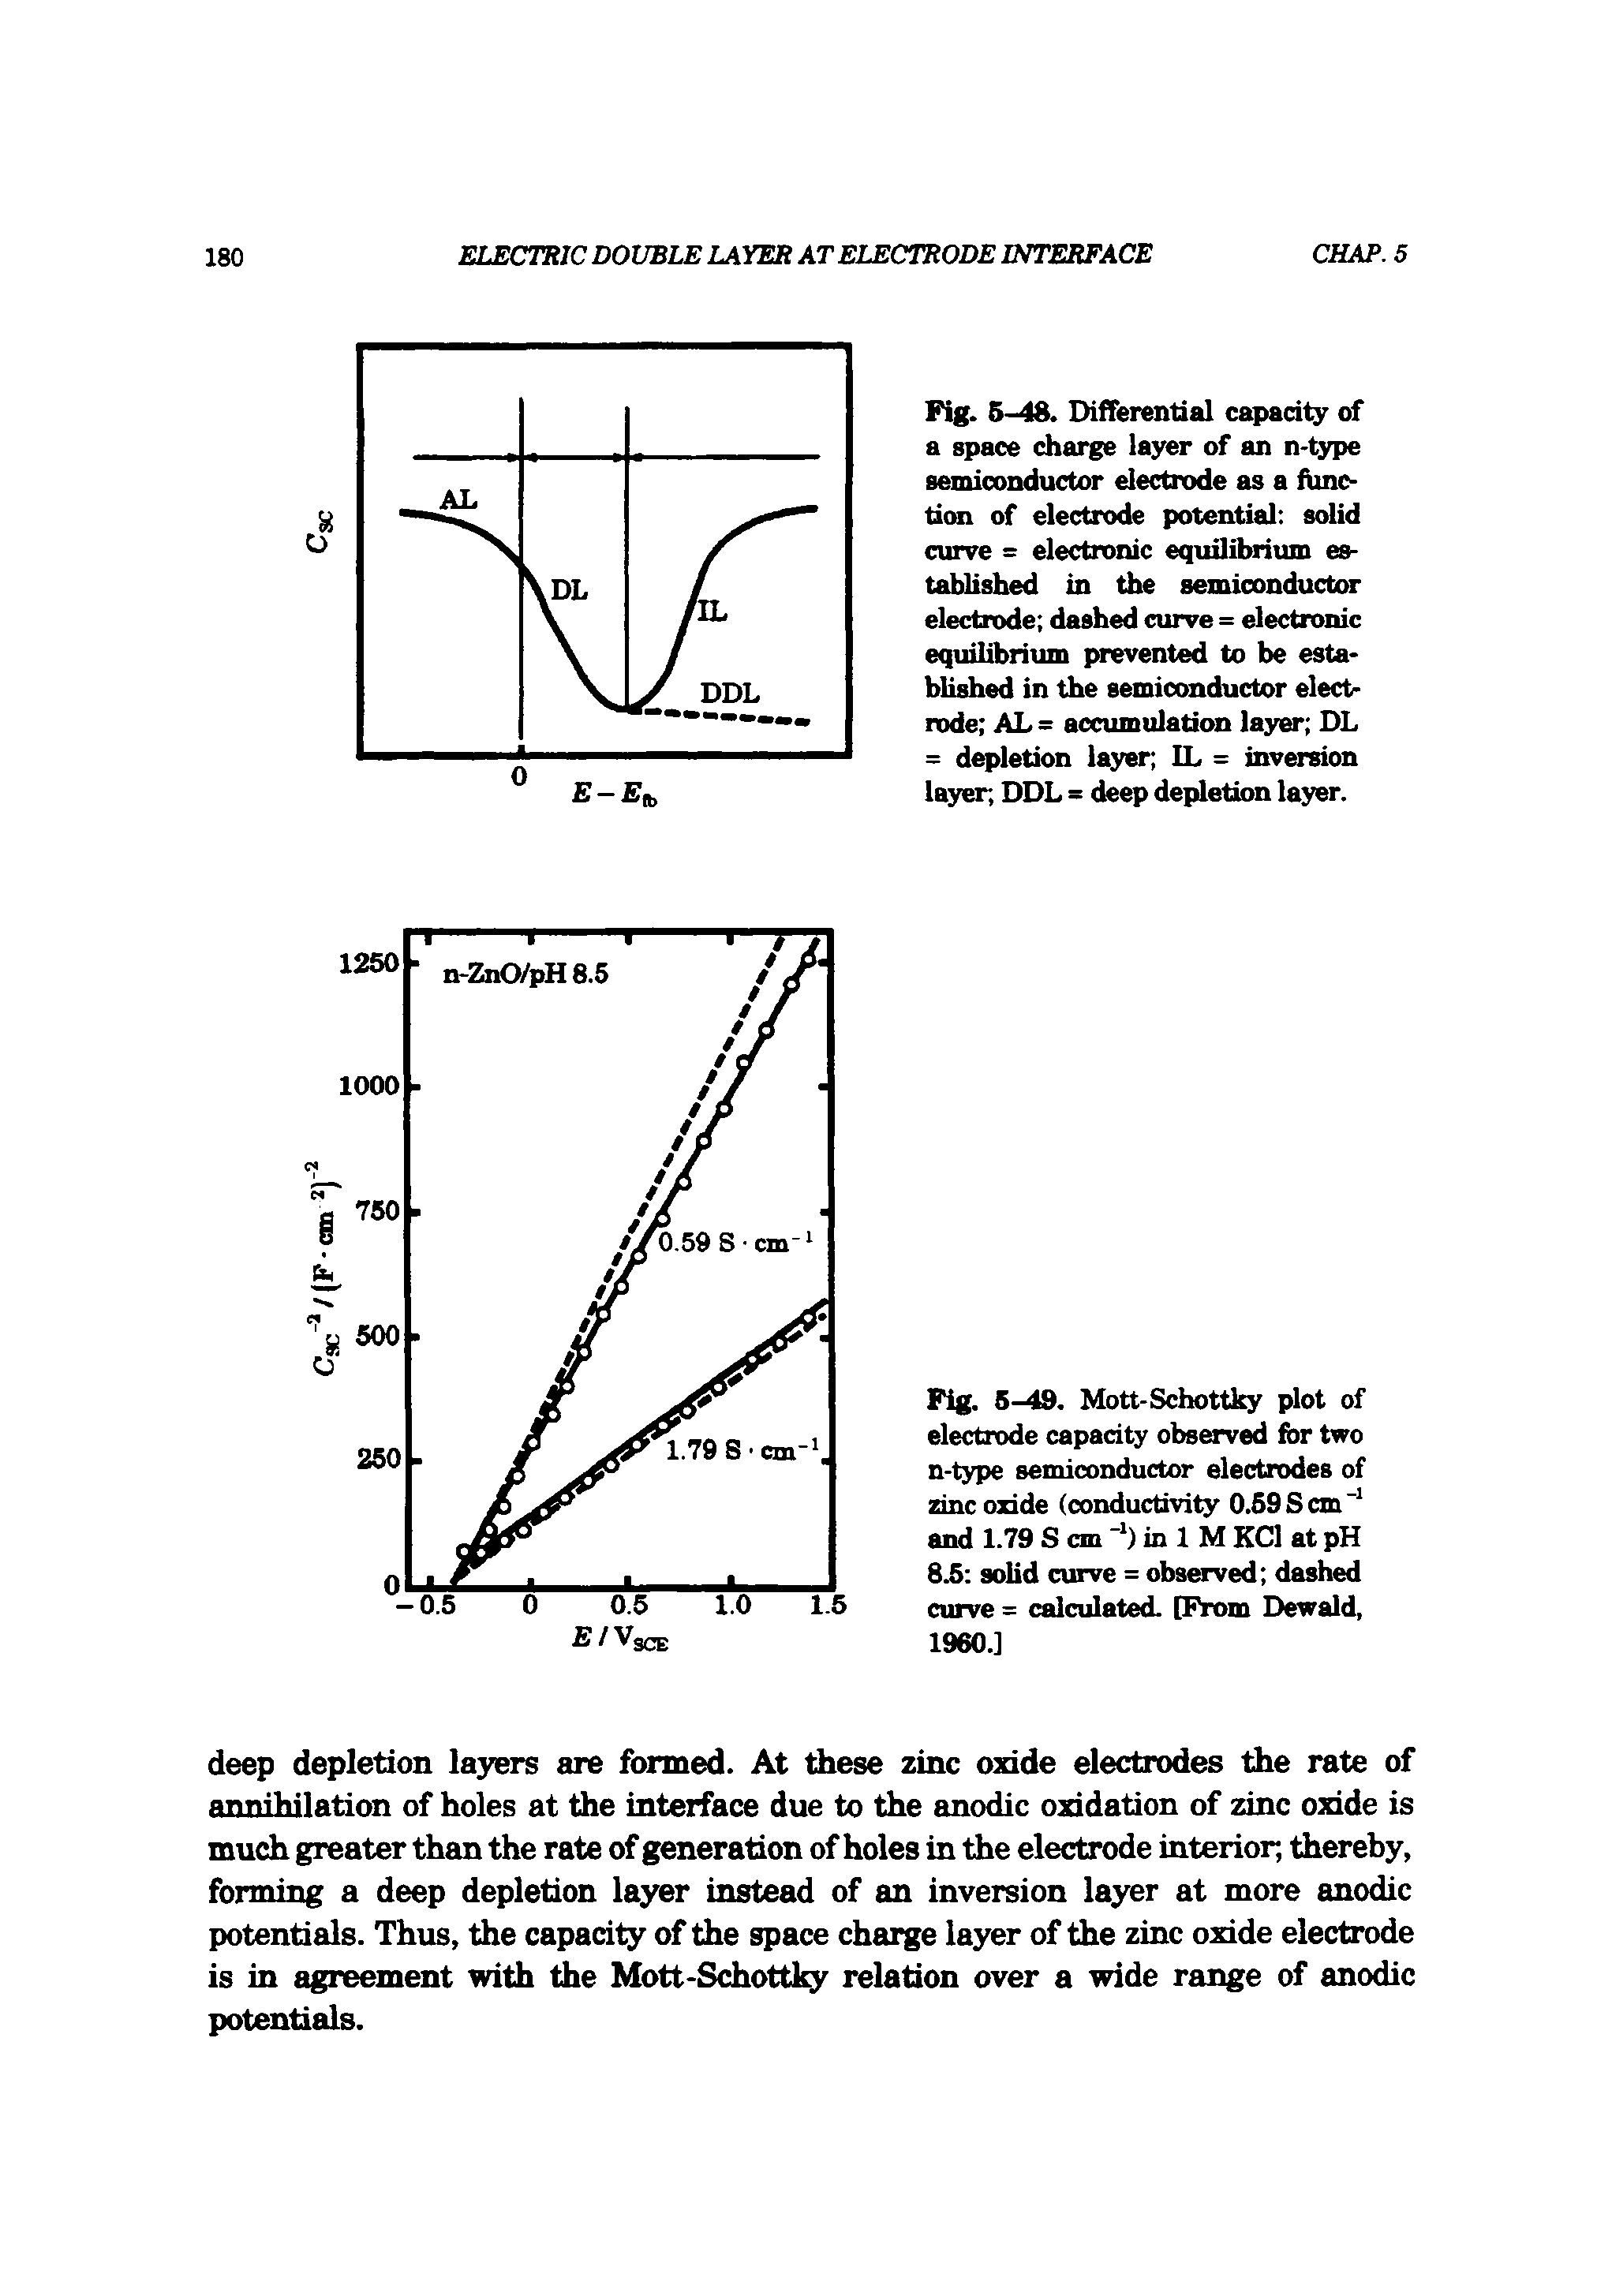 Fig. 6-48. Differential capacity of a space charge layer of an n-type semiconductor electrode as a function of electrode potential solid cunre = electronic equilibrium established in the semiconductor electrode dashed curve = electronic equilibrium prevented to be established in the semiconductor electrode AL = accumulation layer DL = depletion layer IL = inversion layer, DDL - deep depletion layer.